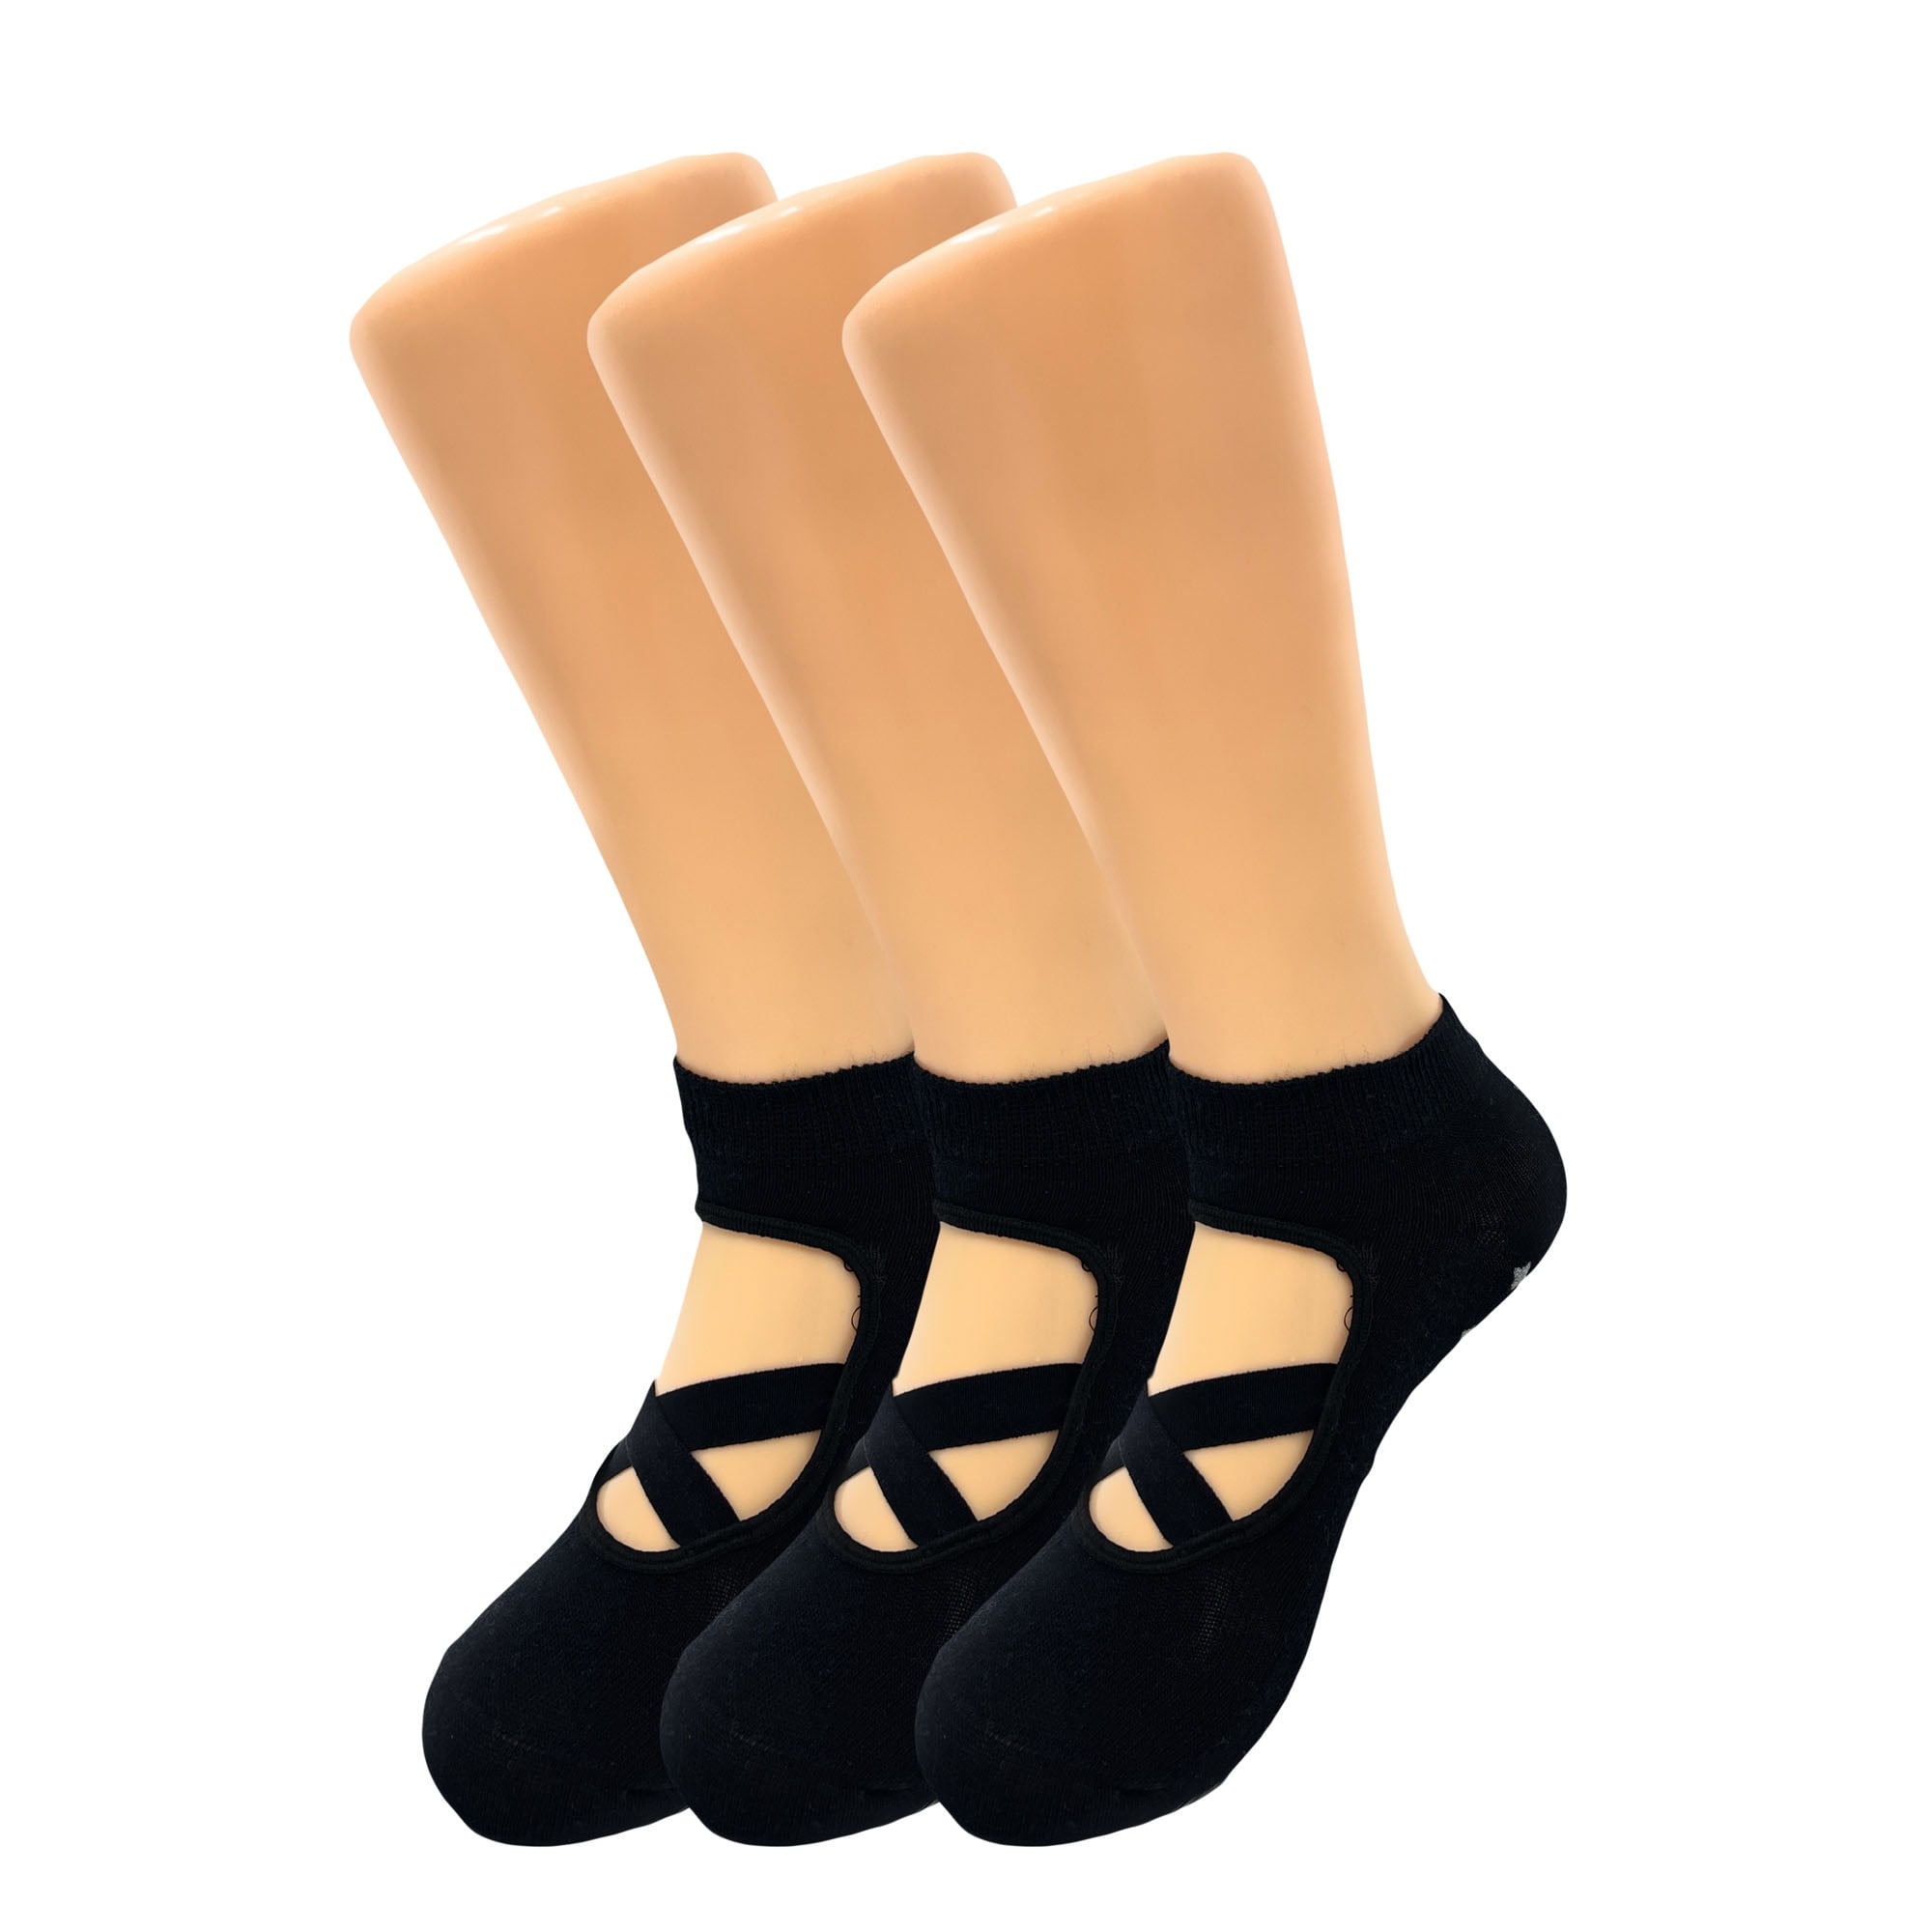 Socks 2023 Alo Women Yoga Socks Womens Indoor Fiess Dance Non Slip Silicone  Sole Middle Tube Yoga Socks18 From Ccur, $36.82